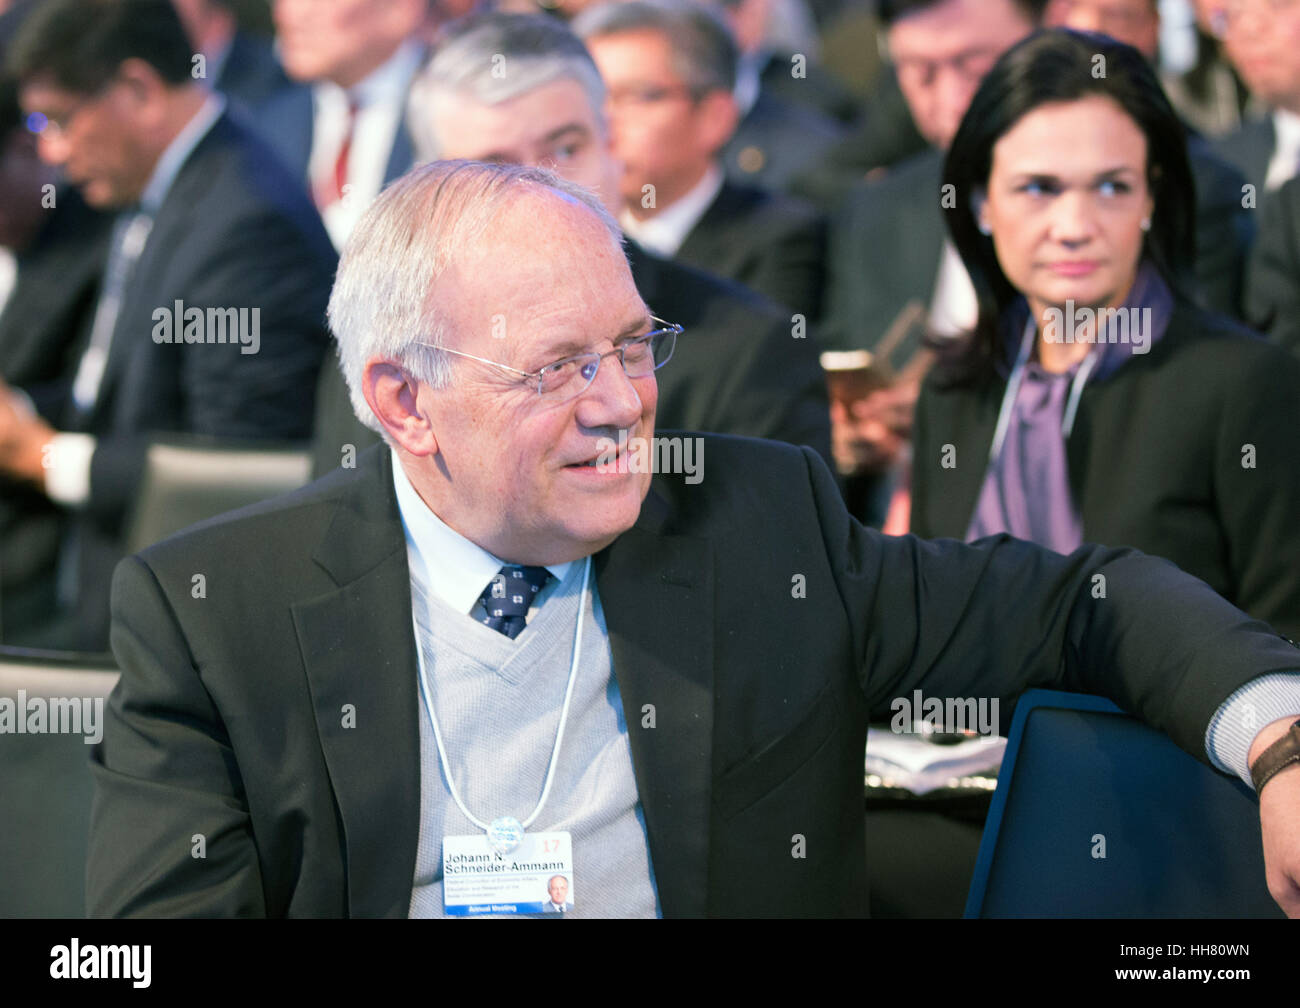 (170117) -- DAVOS, Jan. 17, 2017 (Xinhua) -- Swiss Economy Minister Johann Schneider-Ammann attends the opening session of the World Economic Forum (WEF)'s annual meeting in Davos, Switzerland, Jan. 17, 2017. The 47th WEF's annual meeting kicked off in Davos on Jan. 17 and will last to Jan. 20. (Xinhua/Xu Jinquan)(zhf) Stock Photo